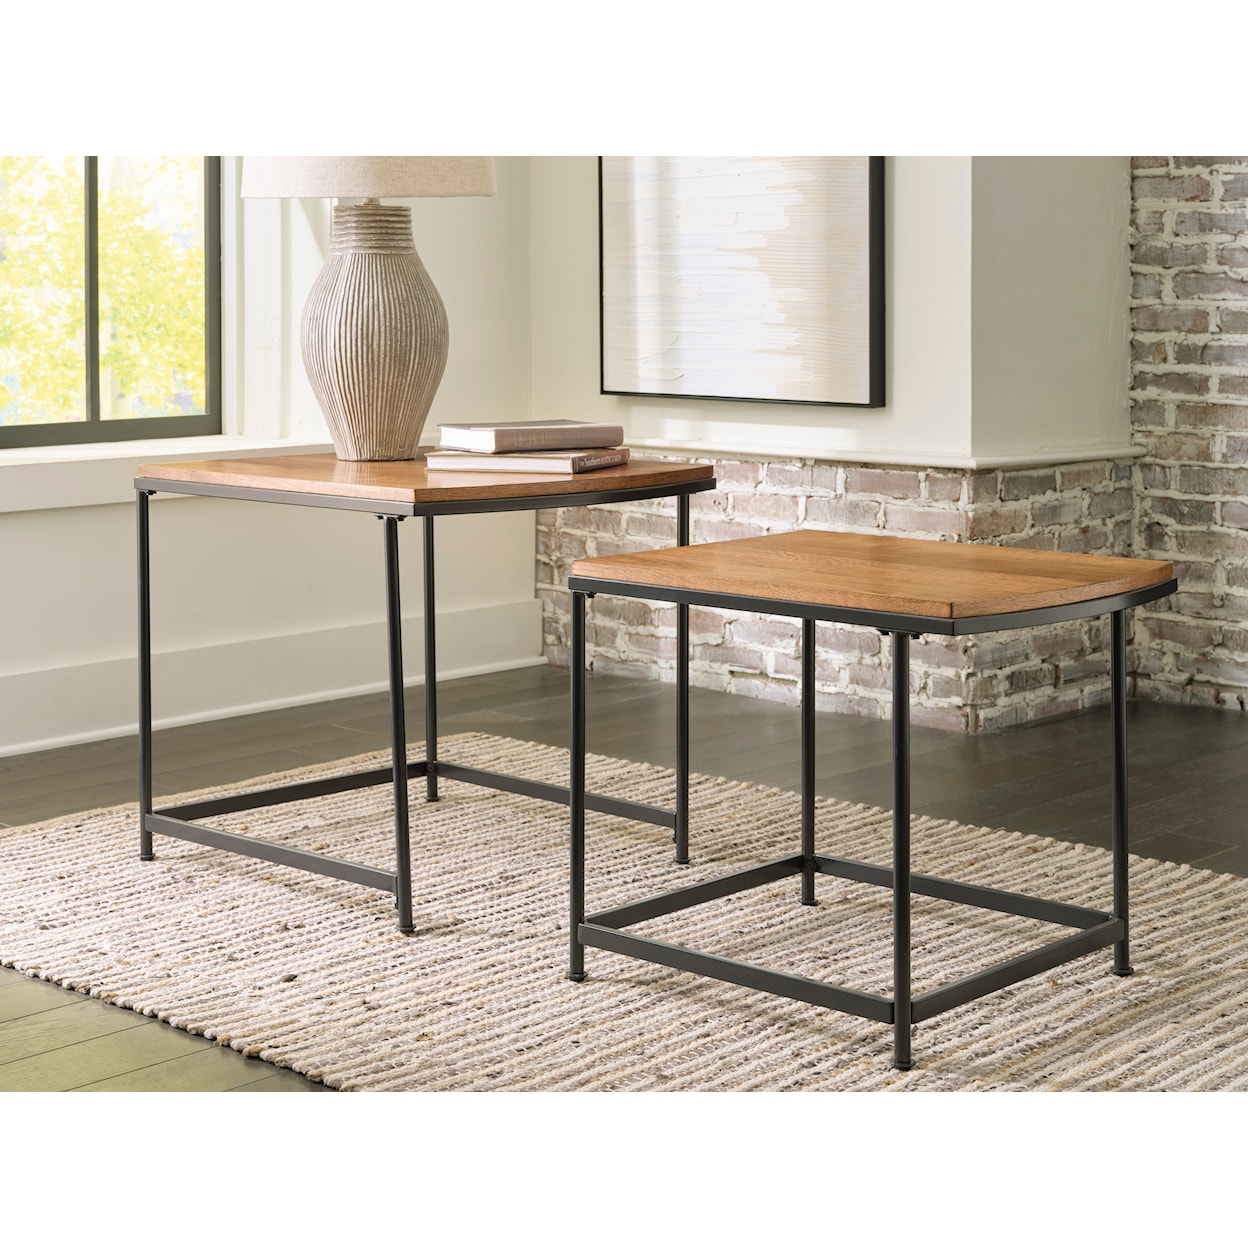 Benchcraft Drezmoore Nesting End Table (Set of 2)